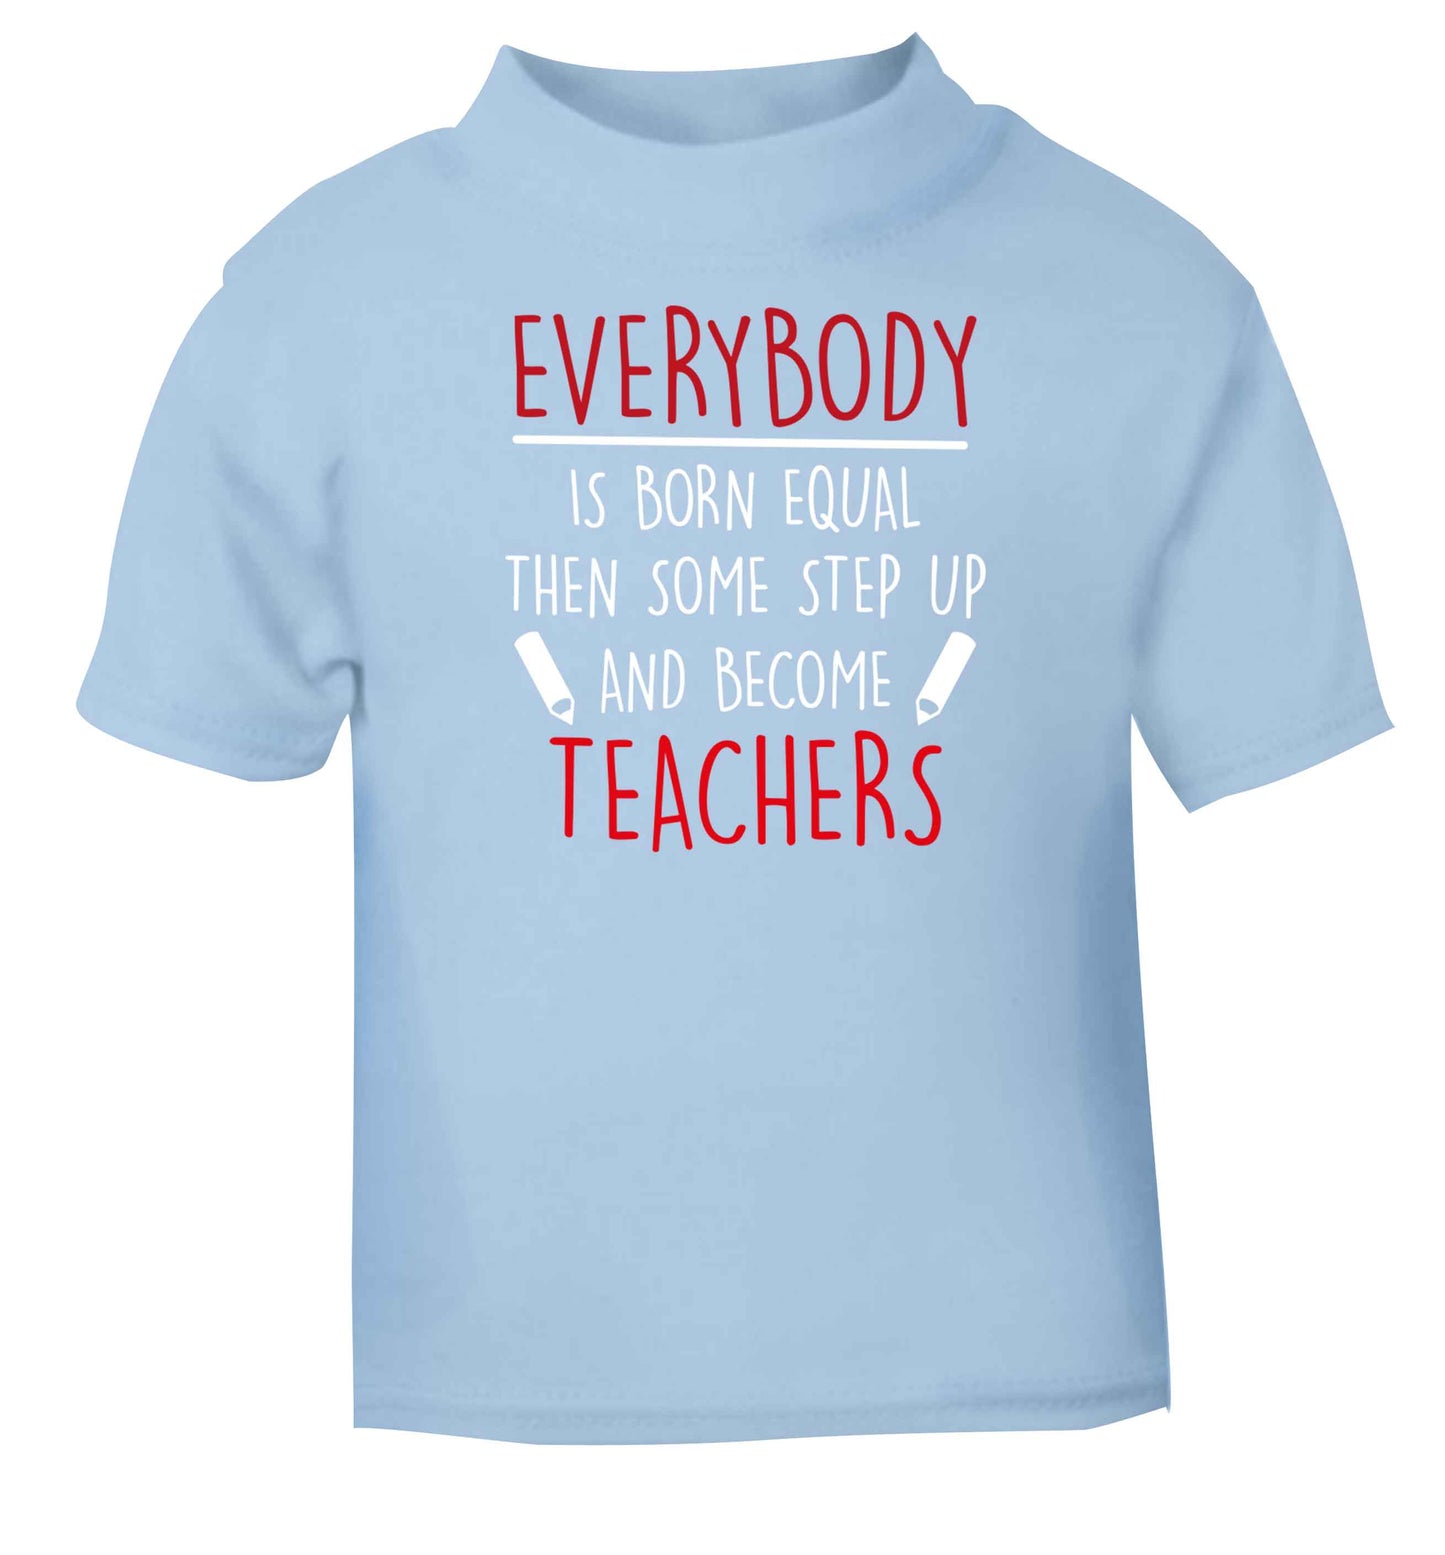 Everybody is born equal then some step up and become teachers light blue baby toddler Tshirt 2 Years